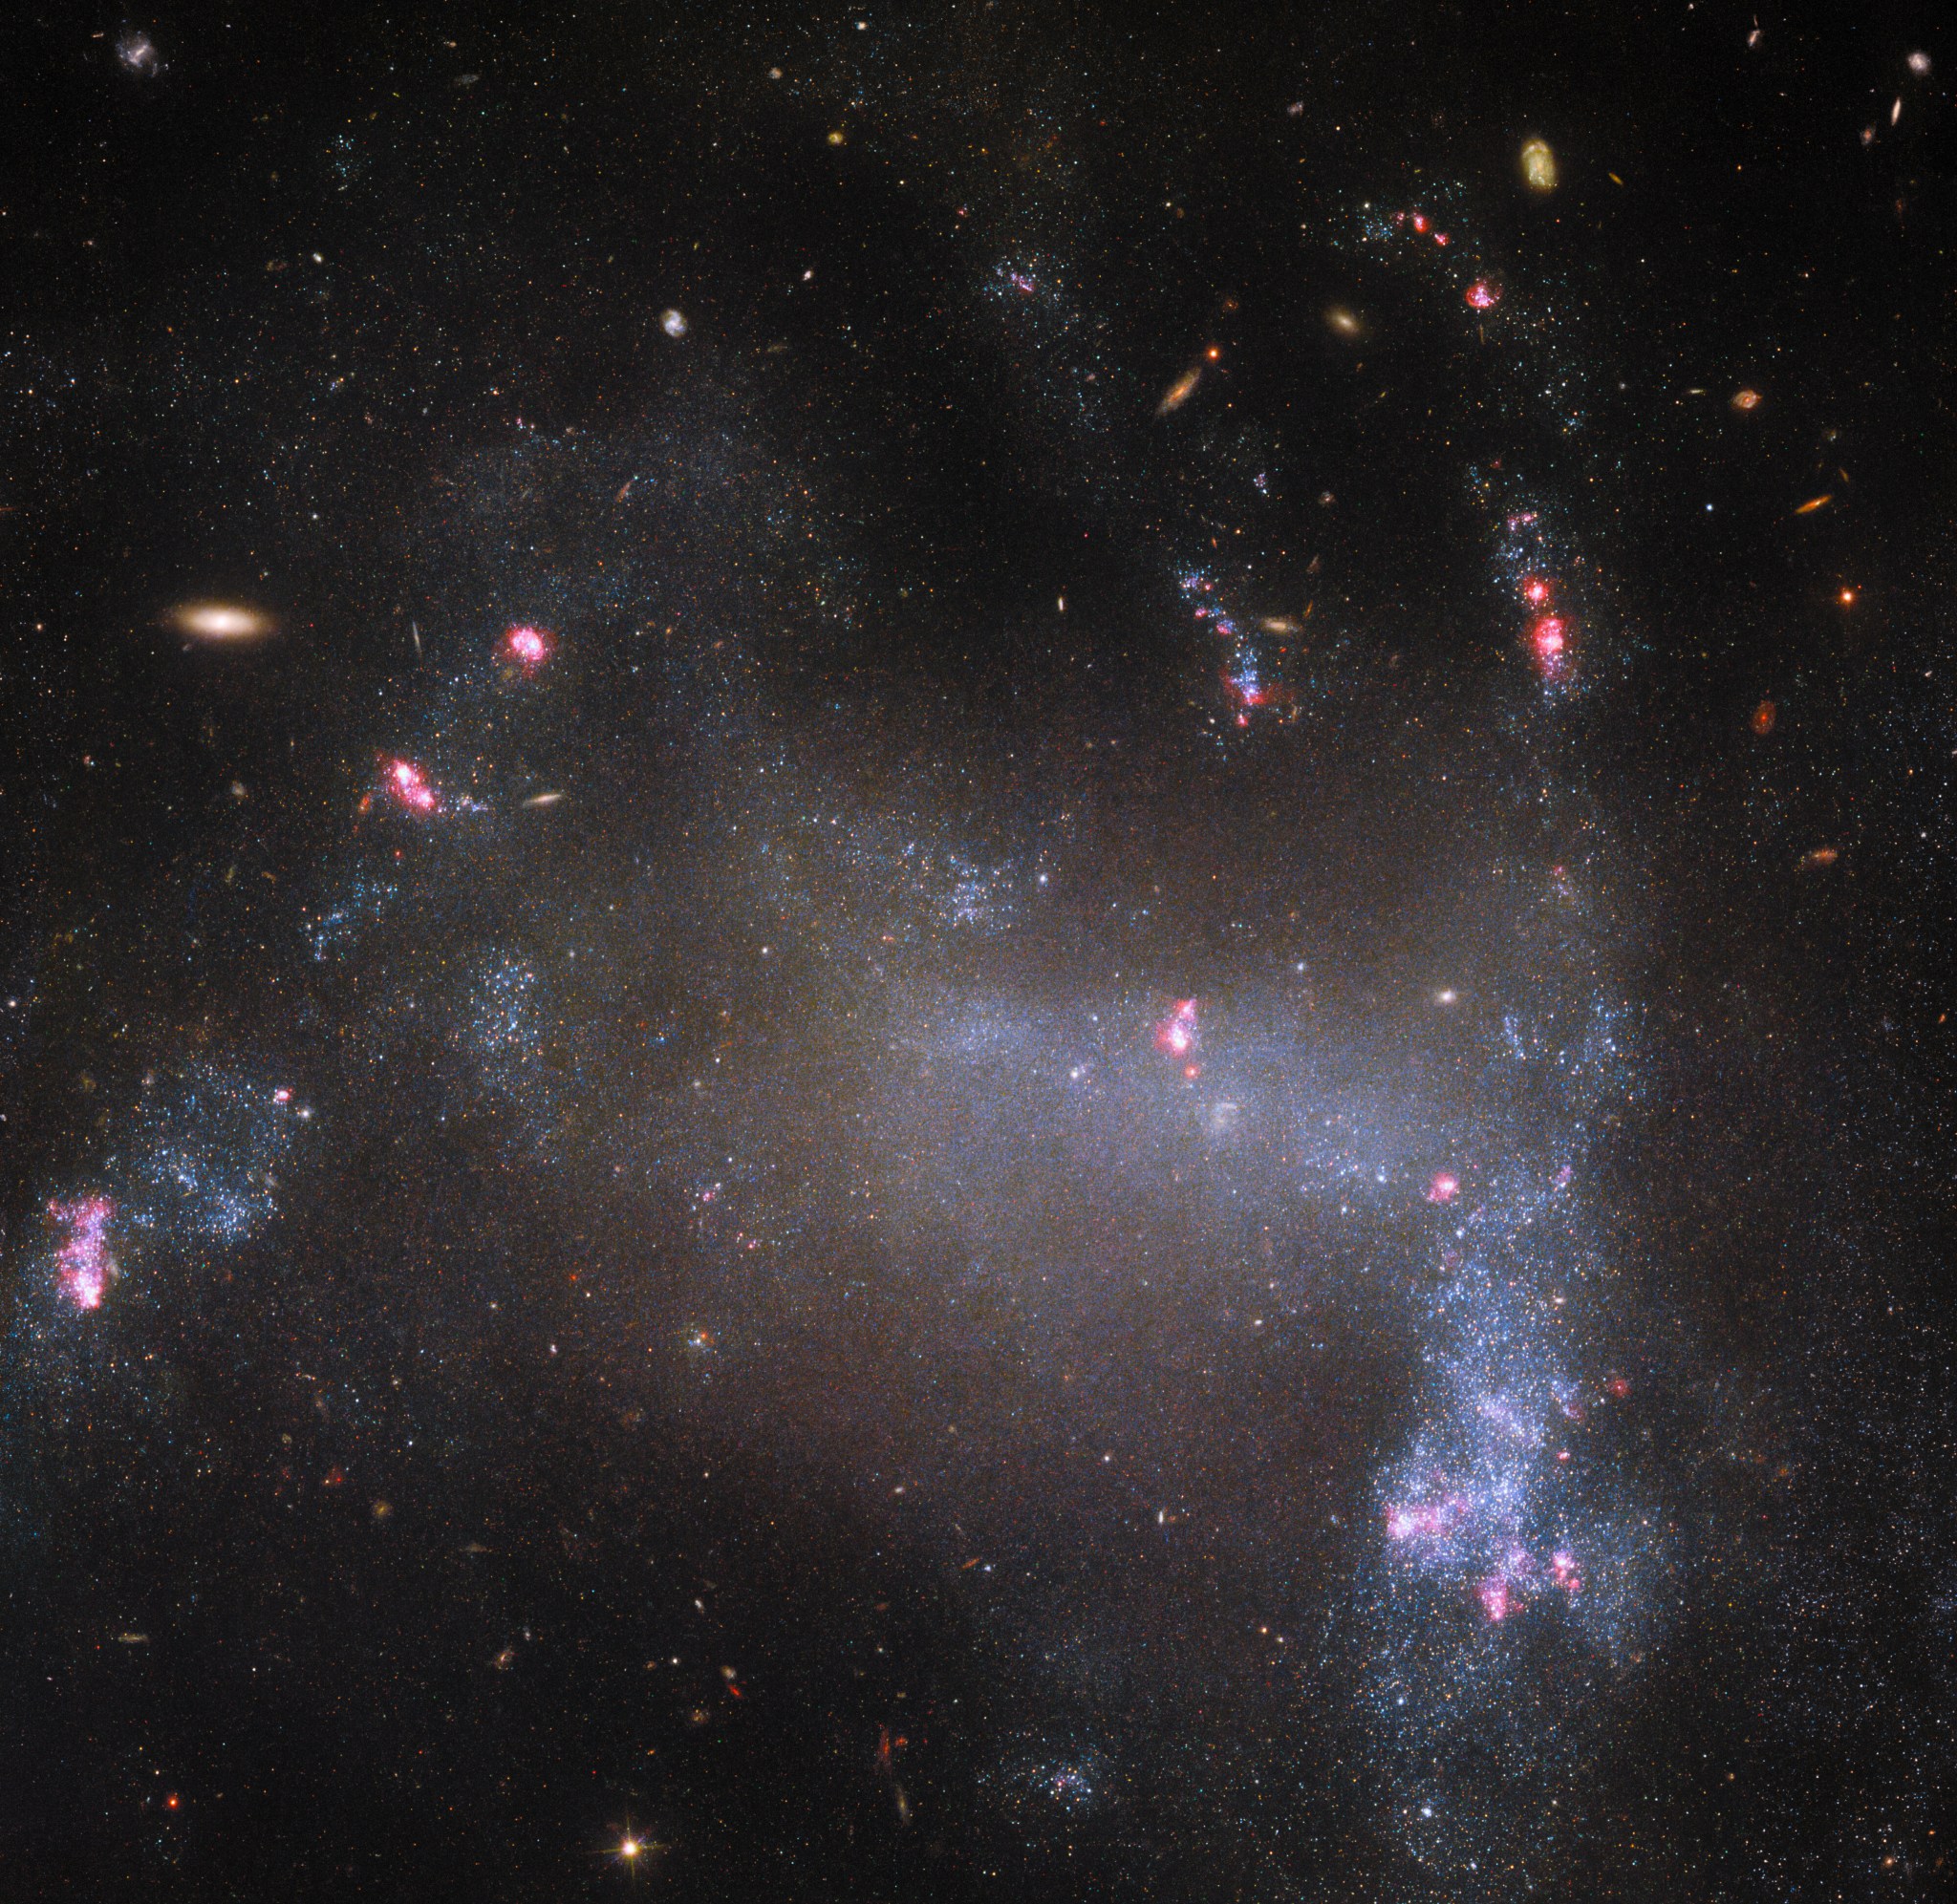 An irregular galaxy with a large central body of dull-colored stars and distorted arms around it. Brightly glowing pink areas where stars are forming dot the arms, along with bluish gas that is brighter than the galactic core. Two large arms flank the left and right of the body, and smaller streams of stars emerge from the top. Other distant galaxies are visible on the edges of the image.